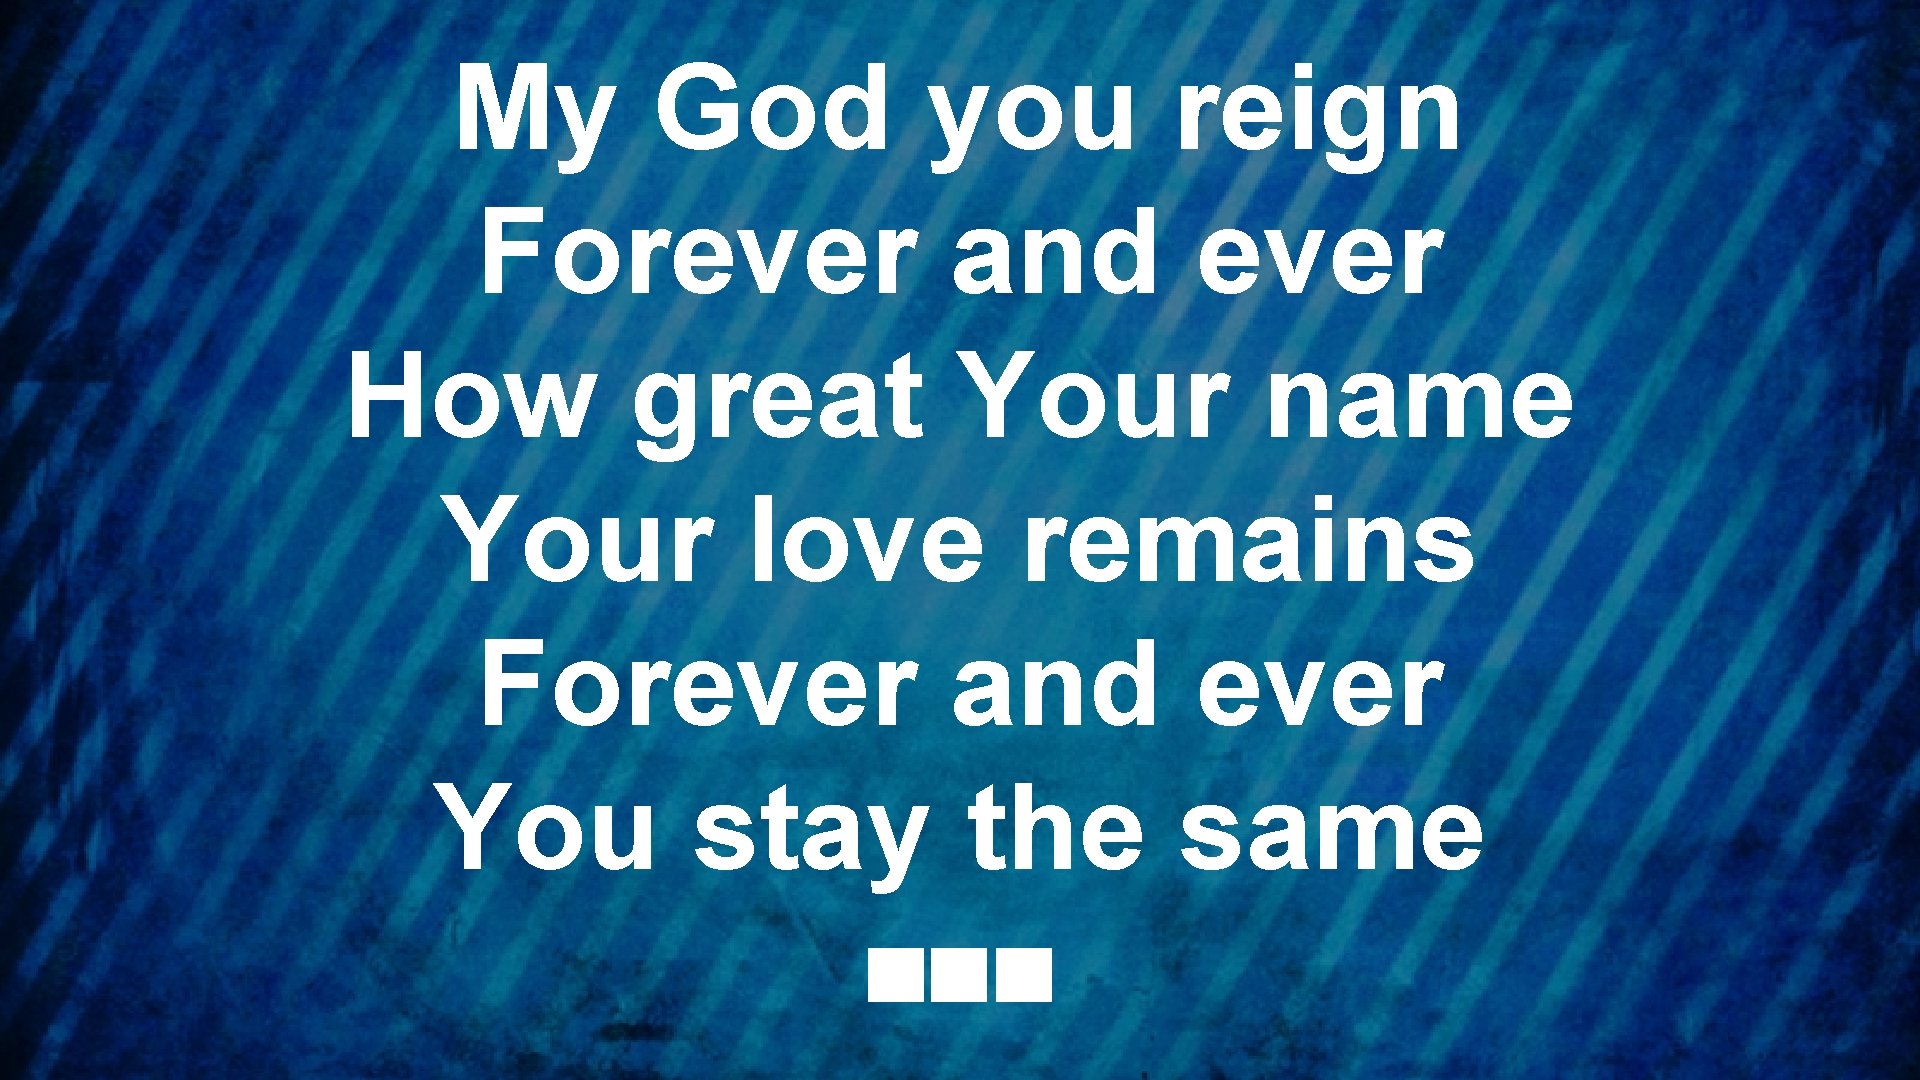 My God you reign Forever and ever How great Your name Your love remains